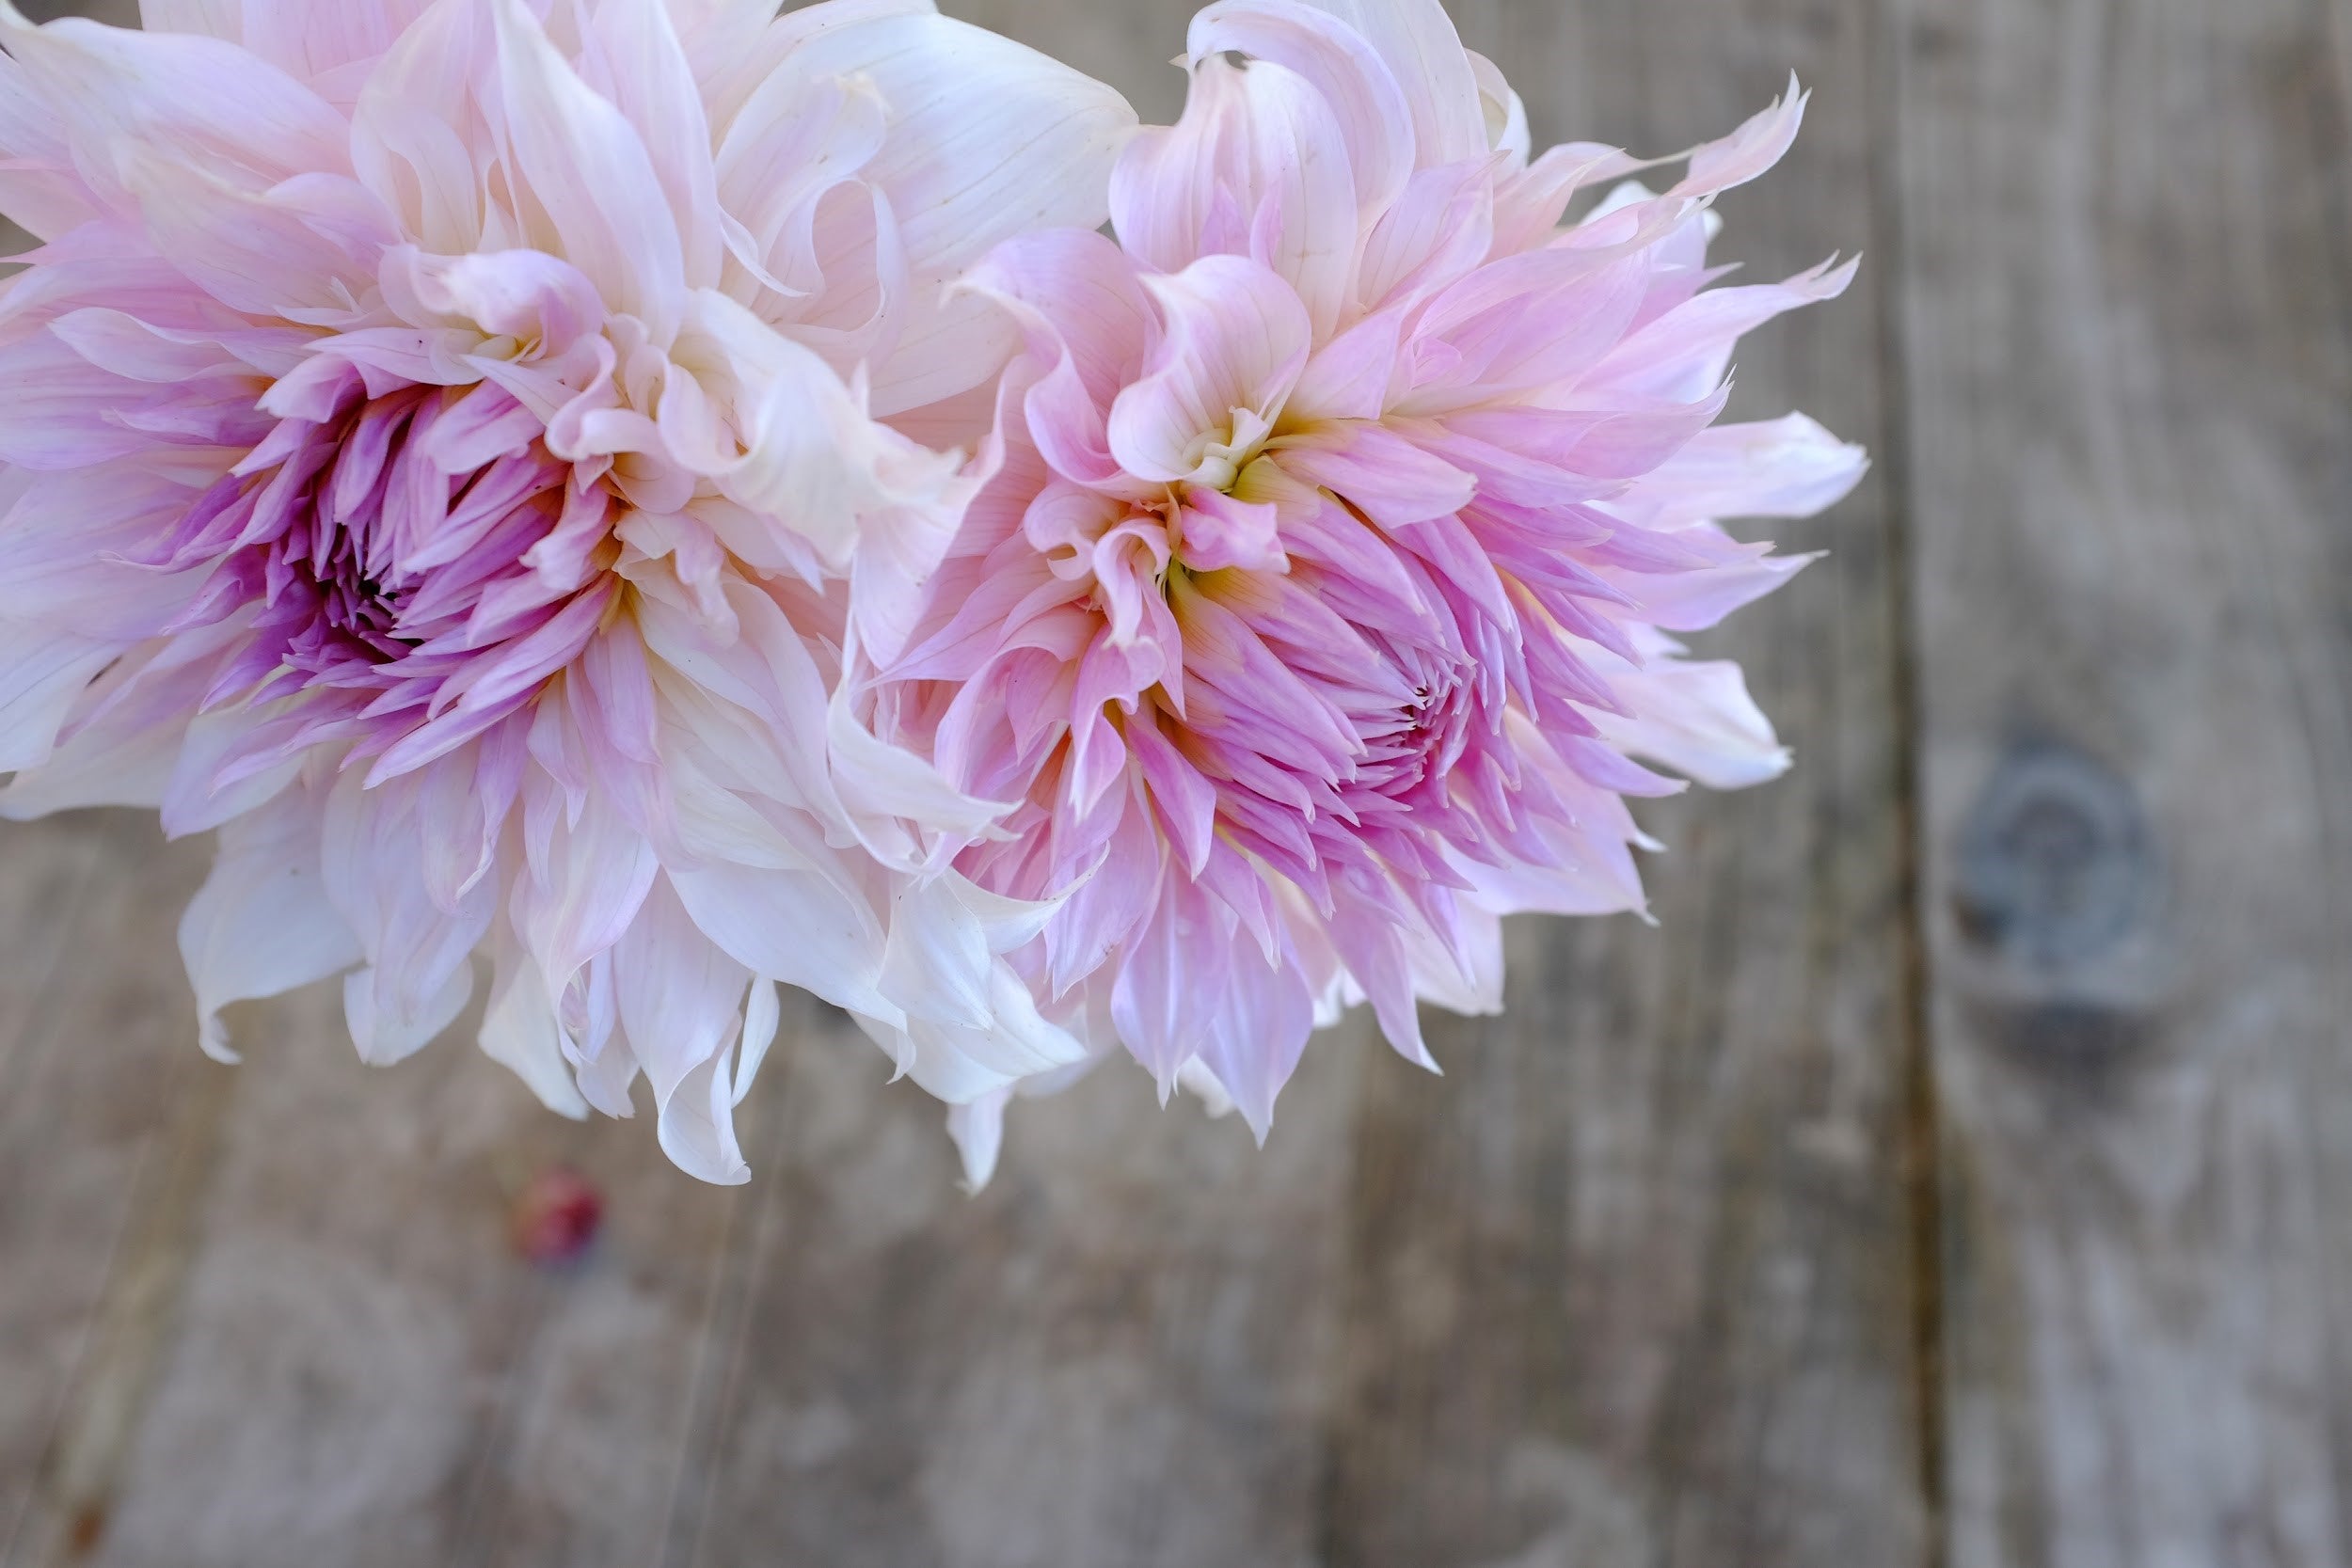 Blush pink and lavender Dahlia Tubers